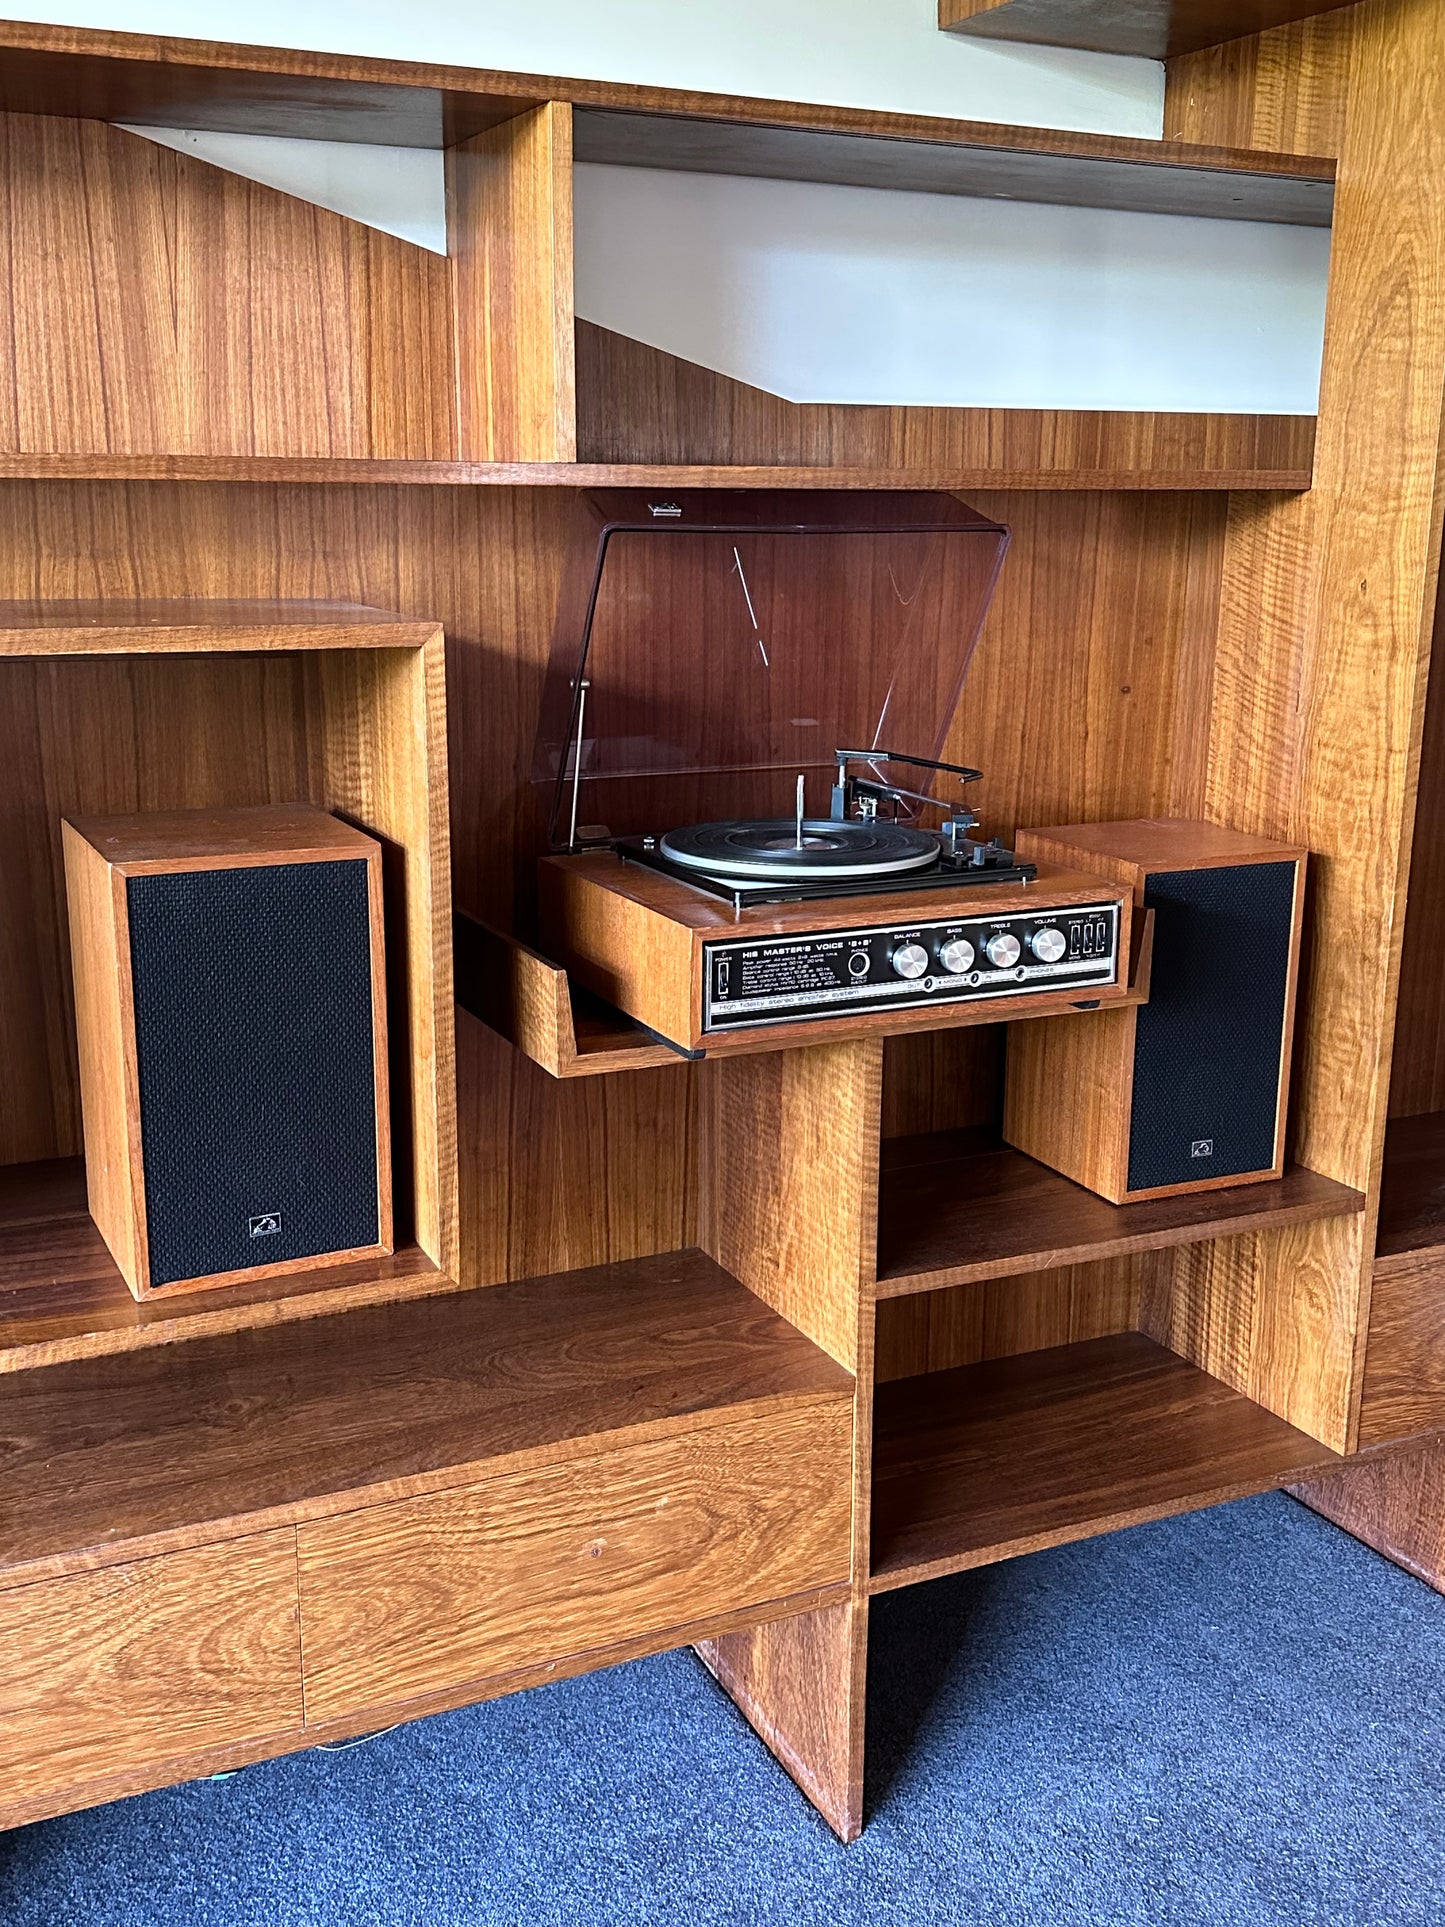 His Masters Voice Record Player and Speakers